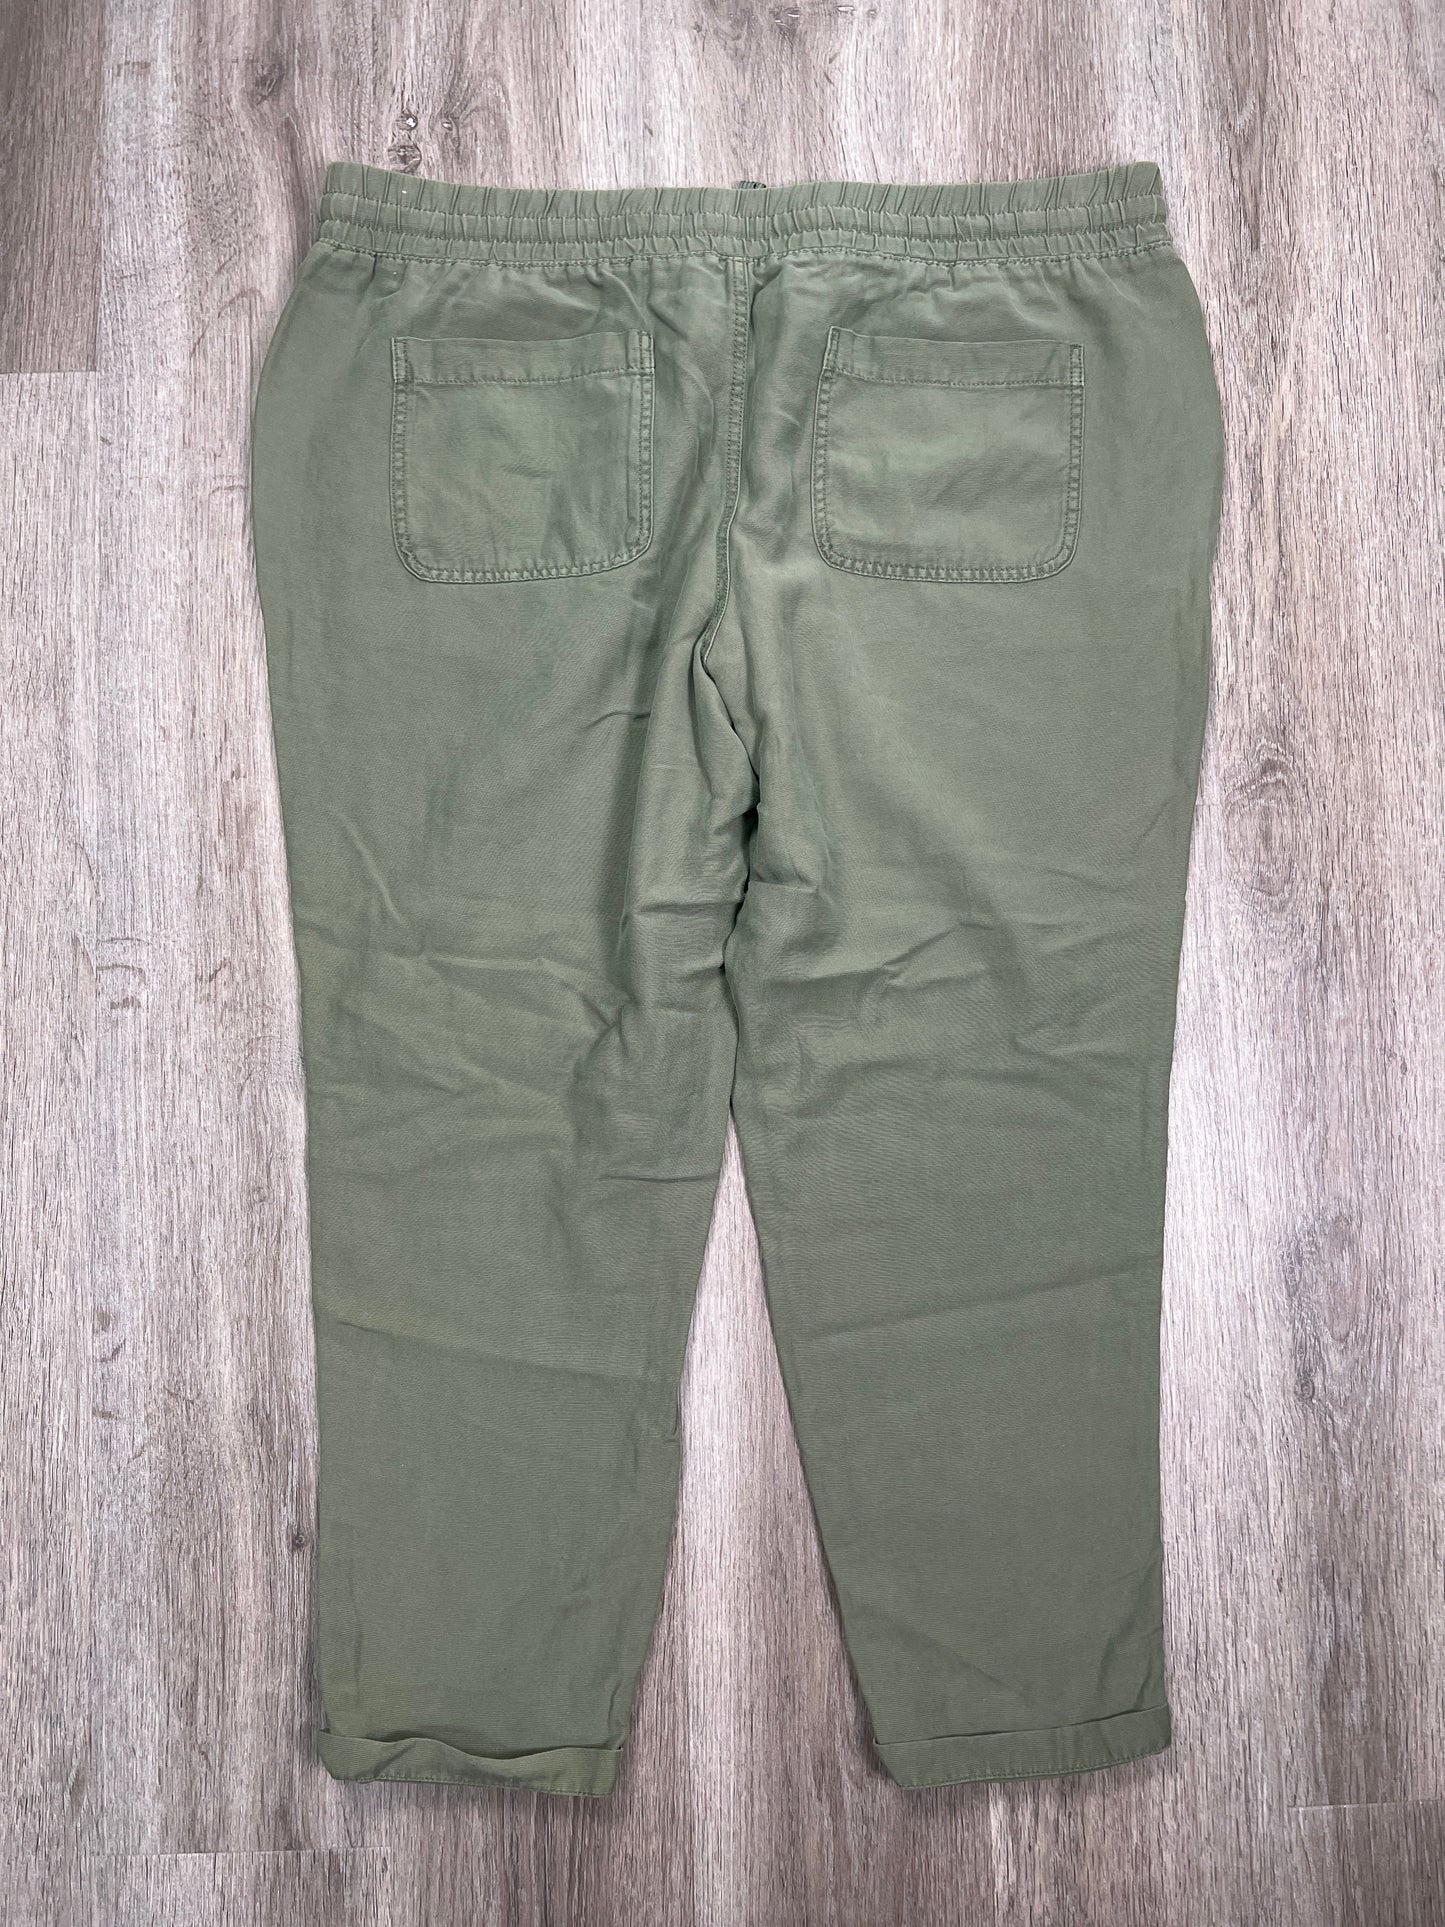 Green Pants Cargo & Utility Maurices, Size 3x